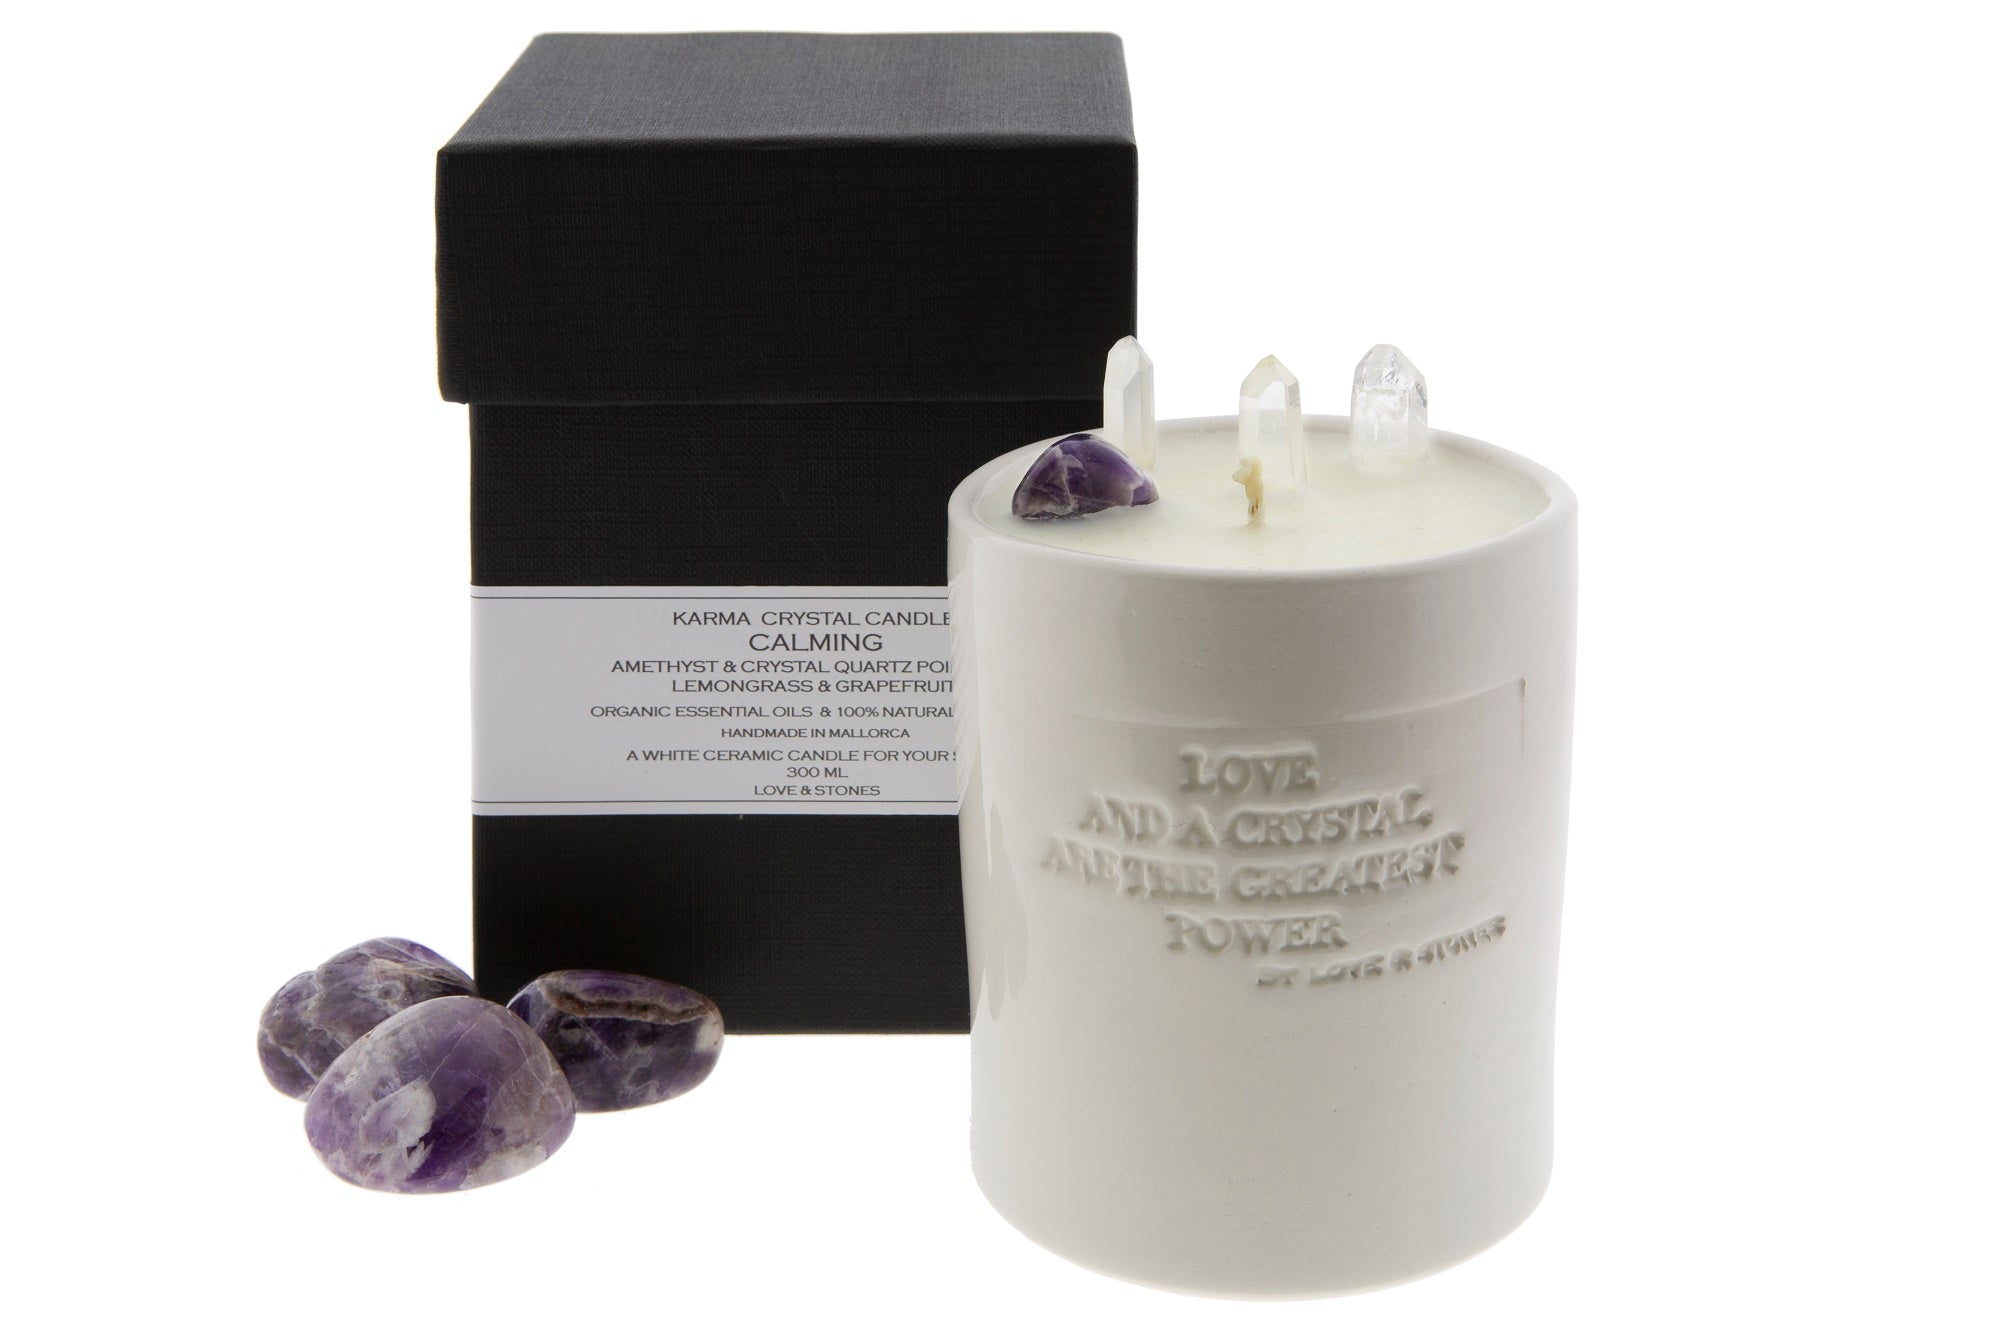 LOVE & STONES - Small White Ceramic Amethyst Crystal Candle 20123